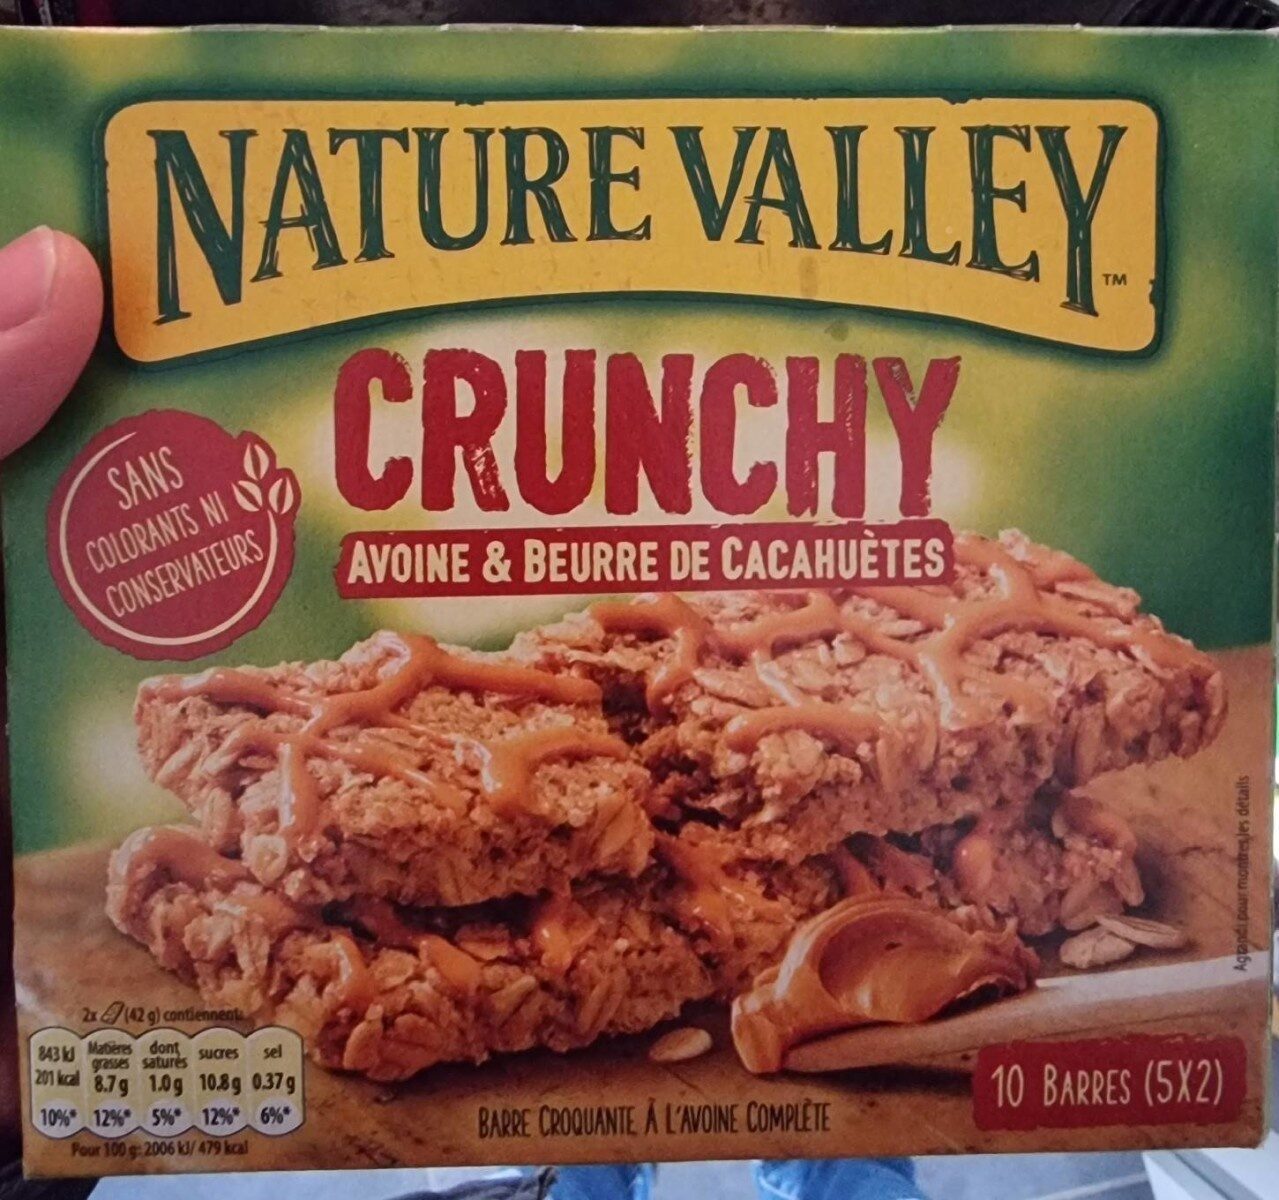 Nature valley crunchy - Product - fr